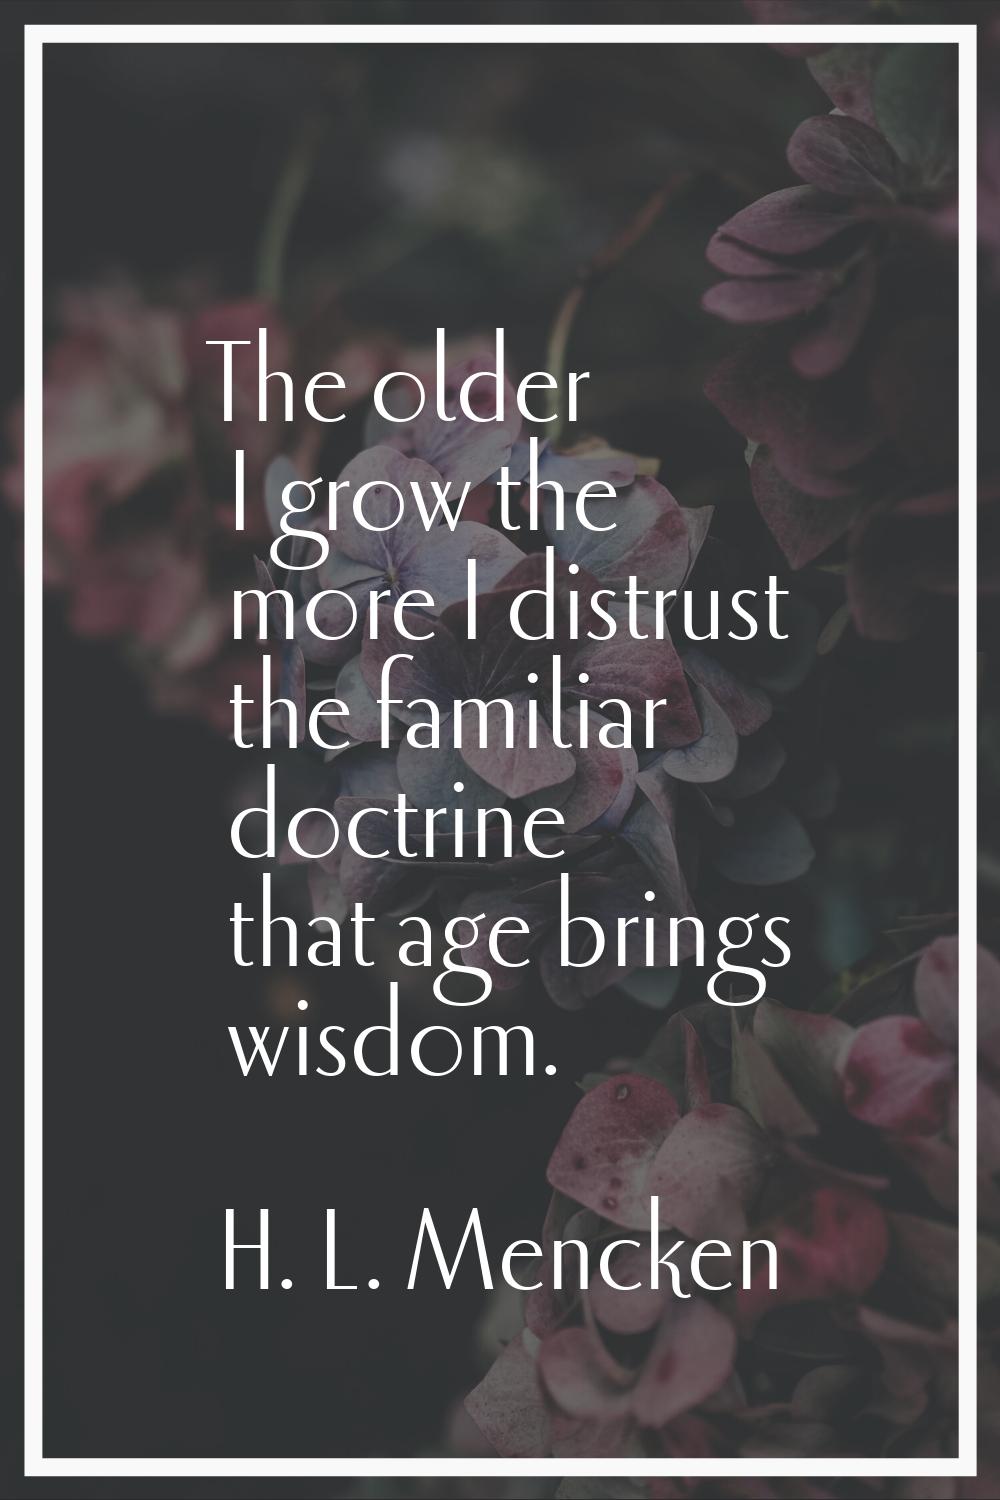 The older I grow the more I distrust the familiar doctrine that age brings wisdom.